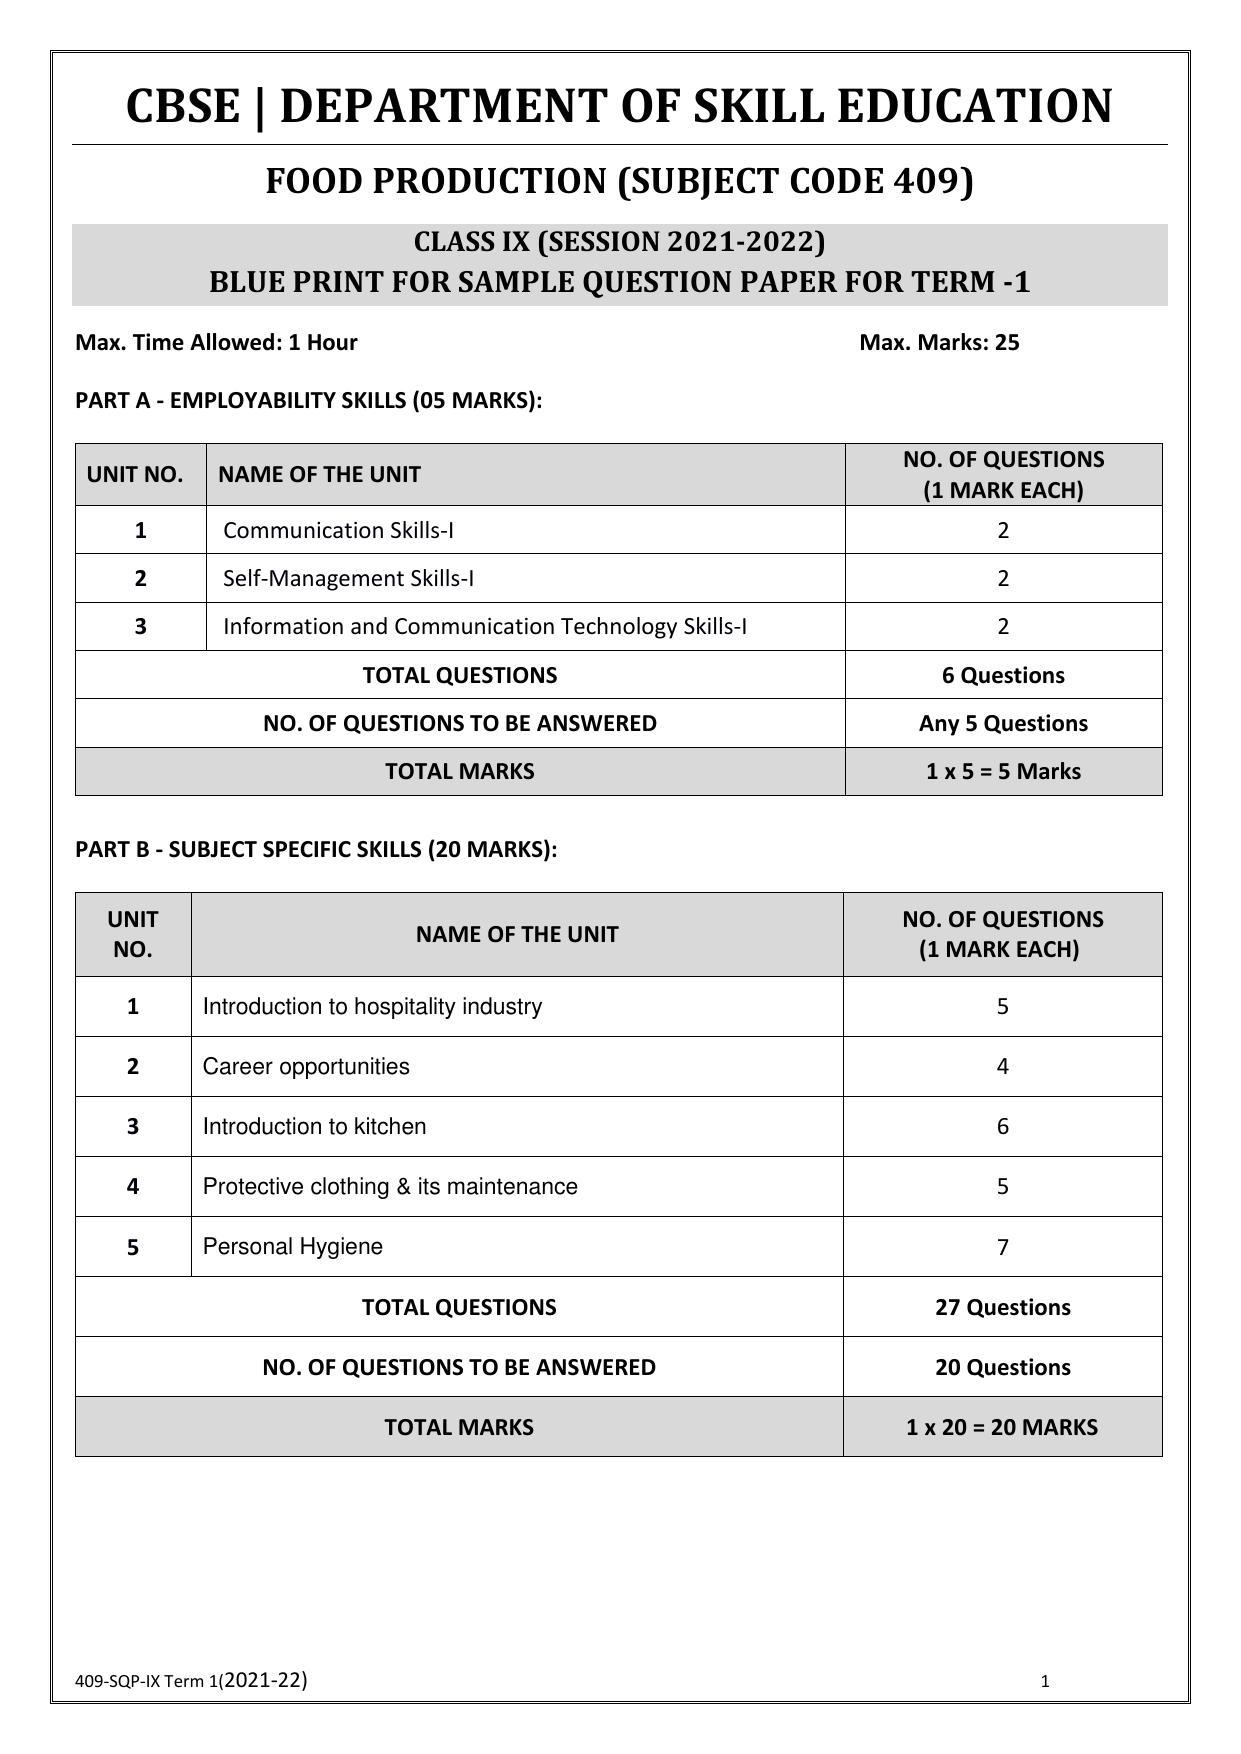 CBSE Class 10 Skill Education (Term I) - Food Production Sample Paper 2021-22 - Page 1